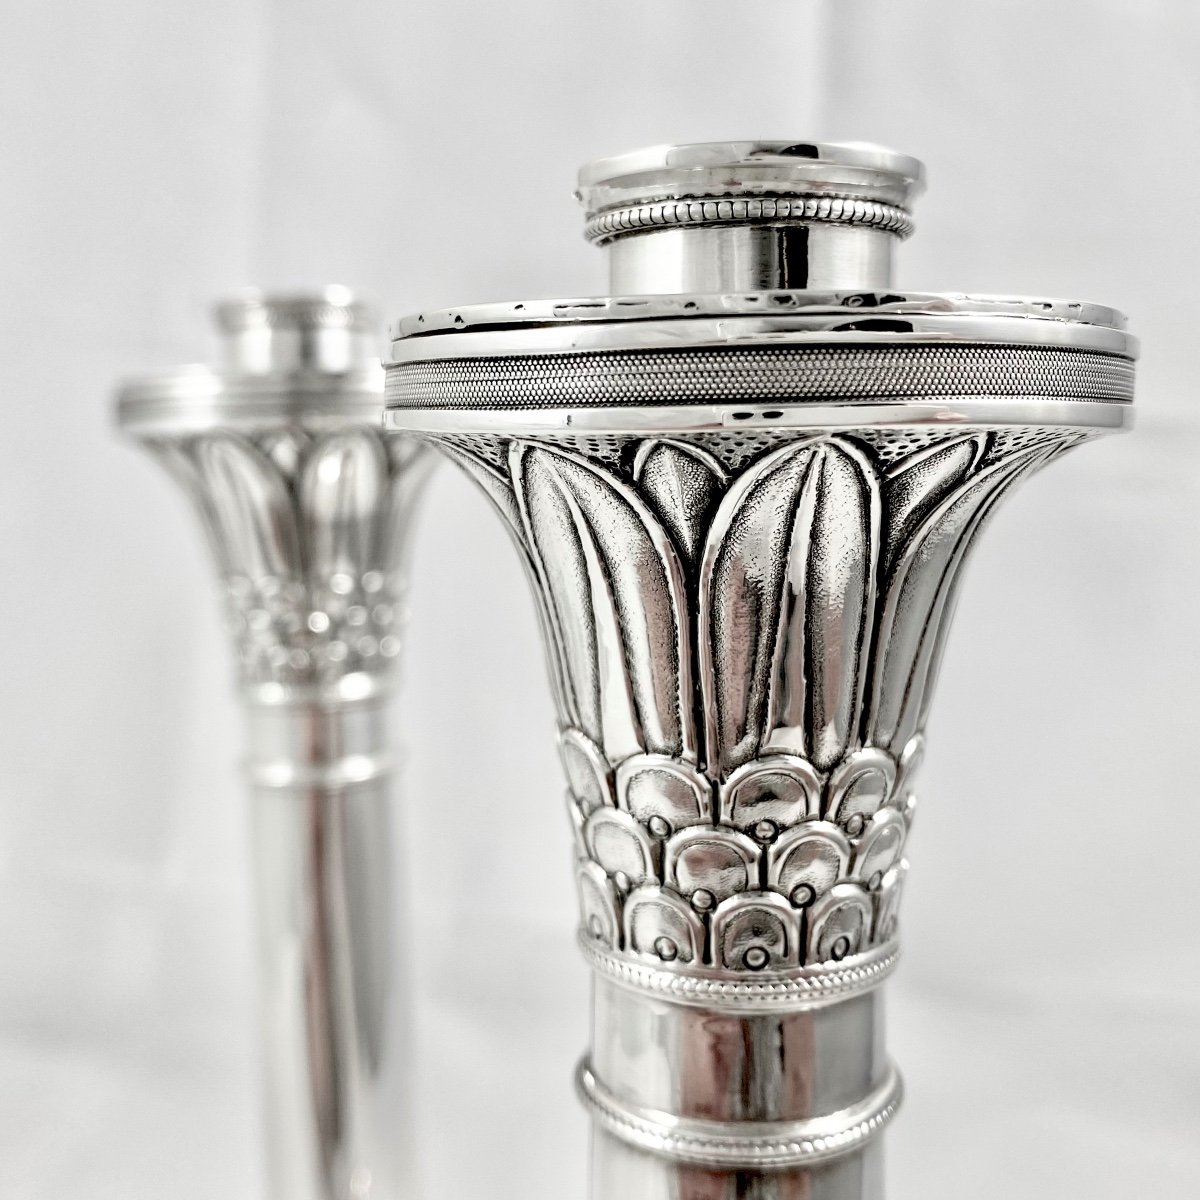 Brussels 1814-1831, Pair Of Candlesticks From The Restoration Period, Sterling Silver, Charles-photo-2